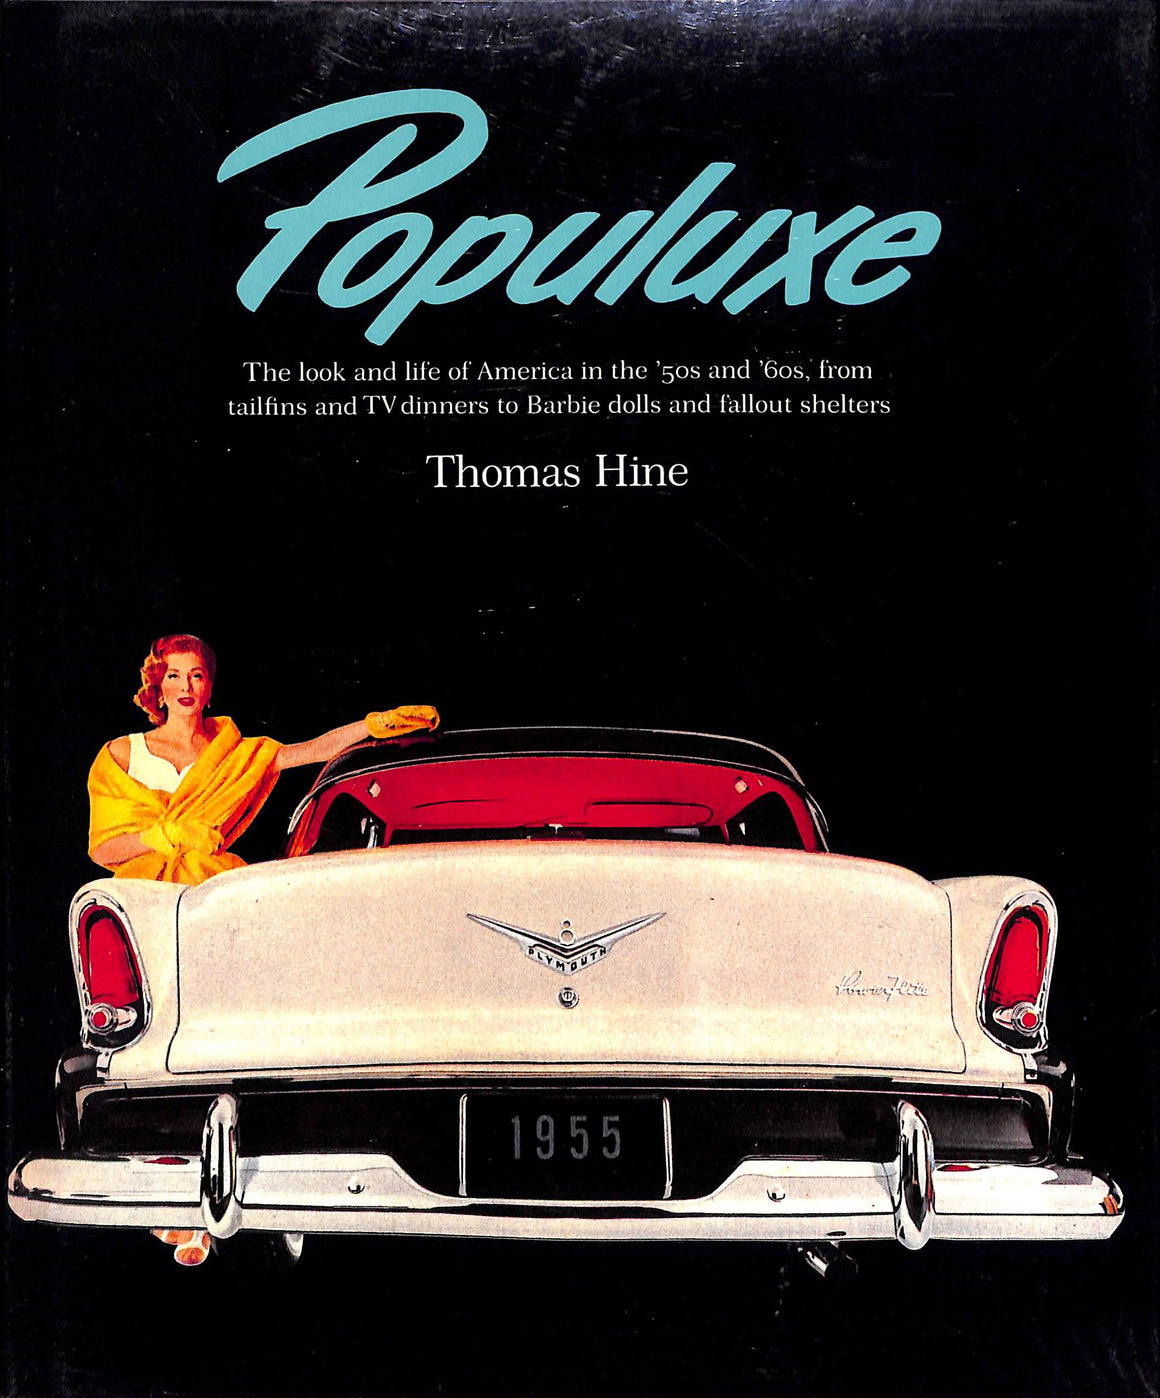 "Populuxe: The Look And Life Of America In The '50s & '60s"